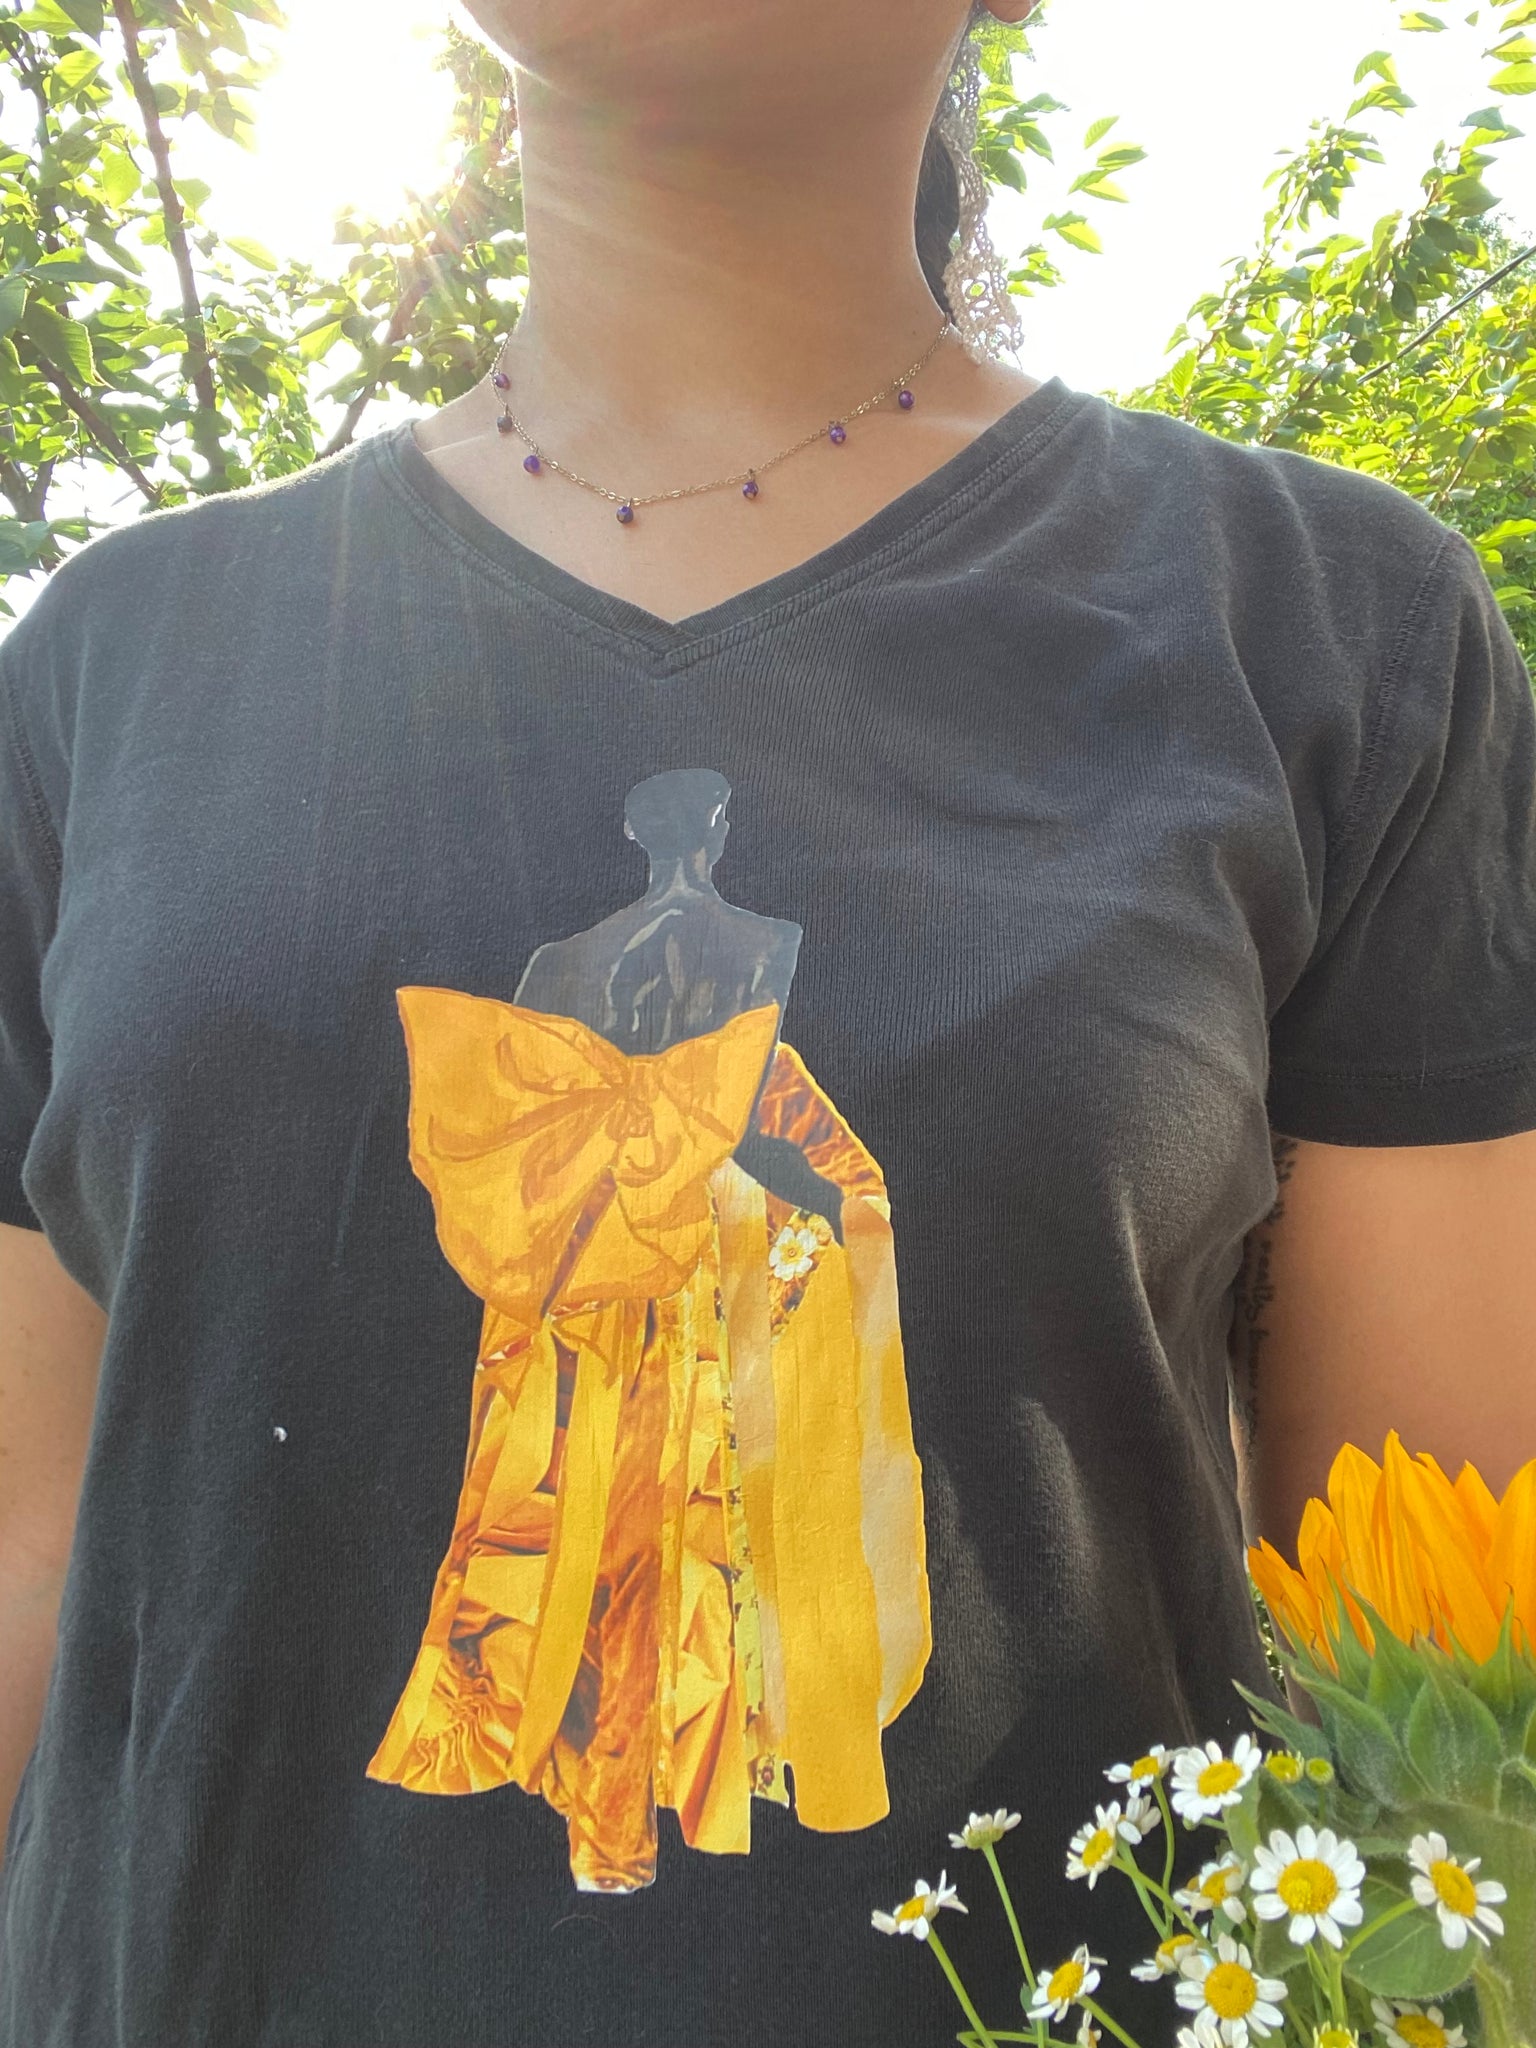 A girl modeling an upcycled black V-neck t-shirt with an image on it of model Akiima Ajak wearing a yellow gown